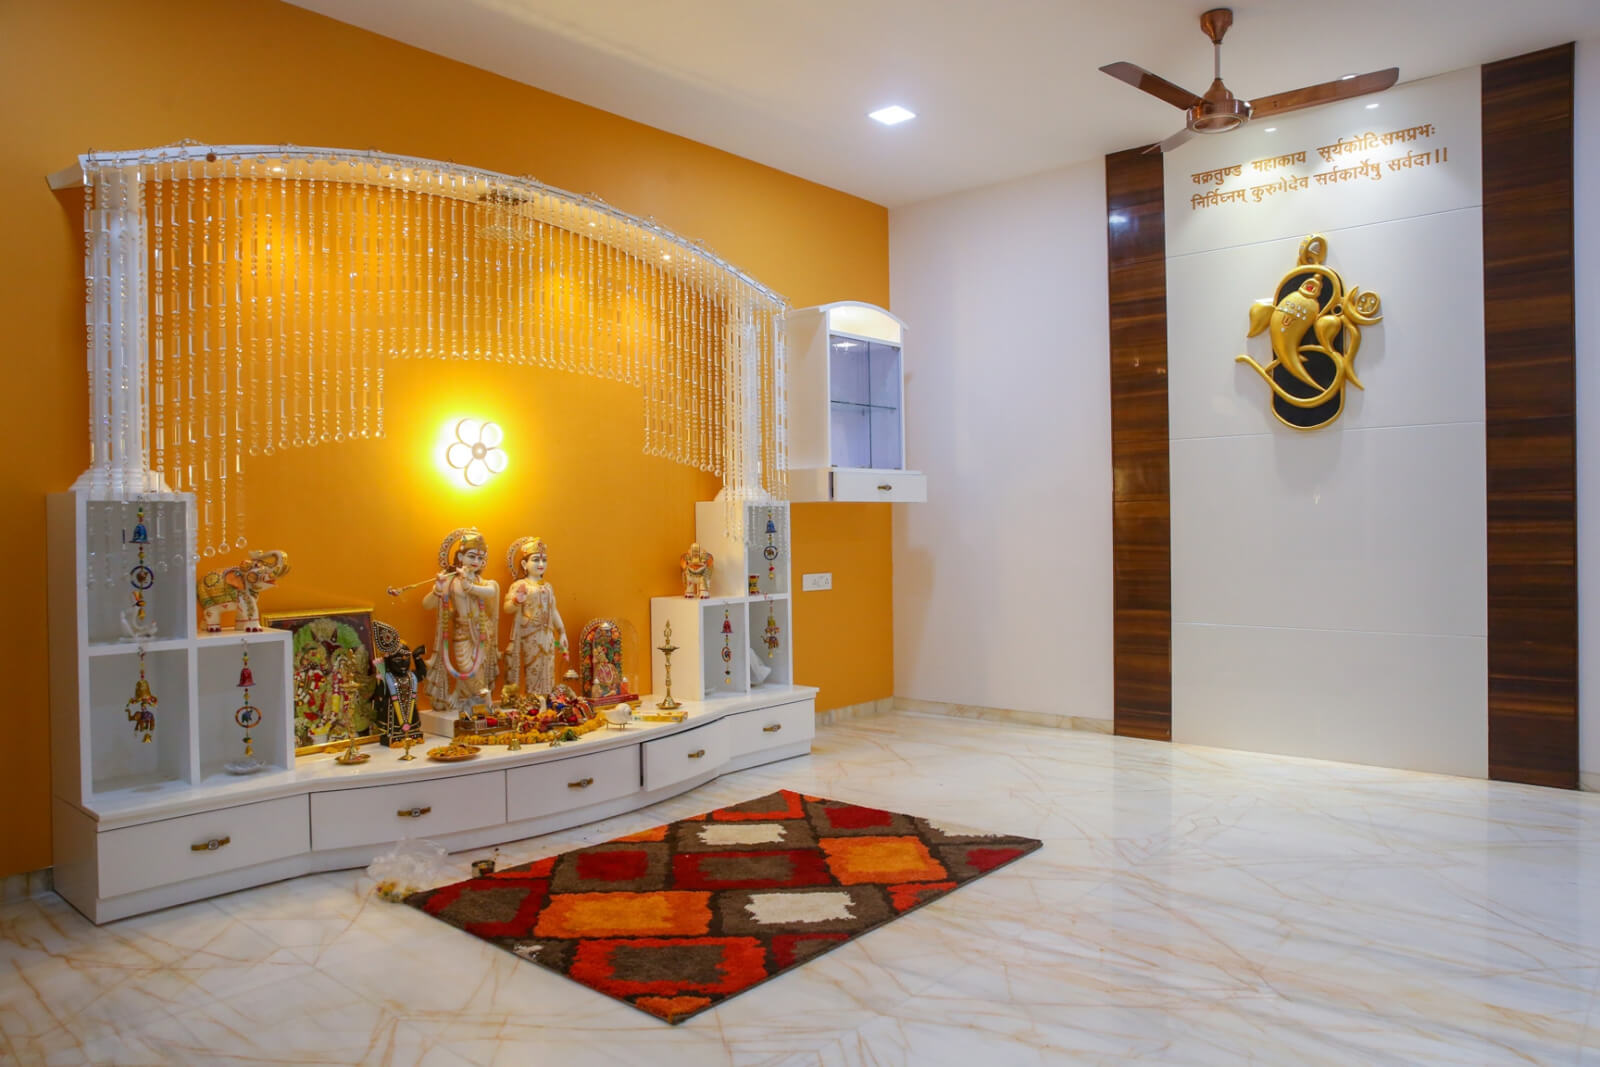 Savouring South Asian Style: Elevate Your Home Decor with Cultural Flair - Ritual Spaces. Photo Credit: https://unsplash.com/